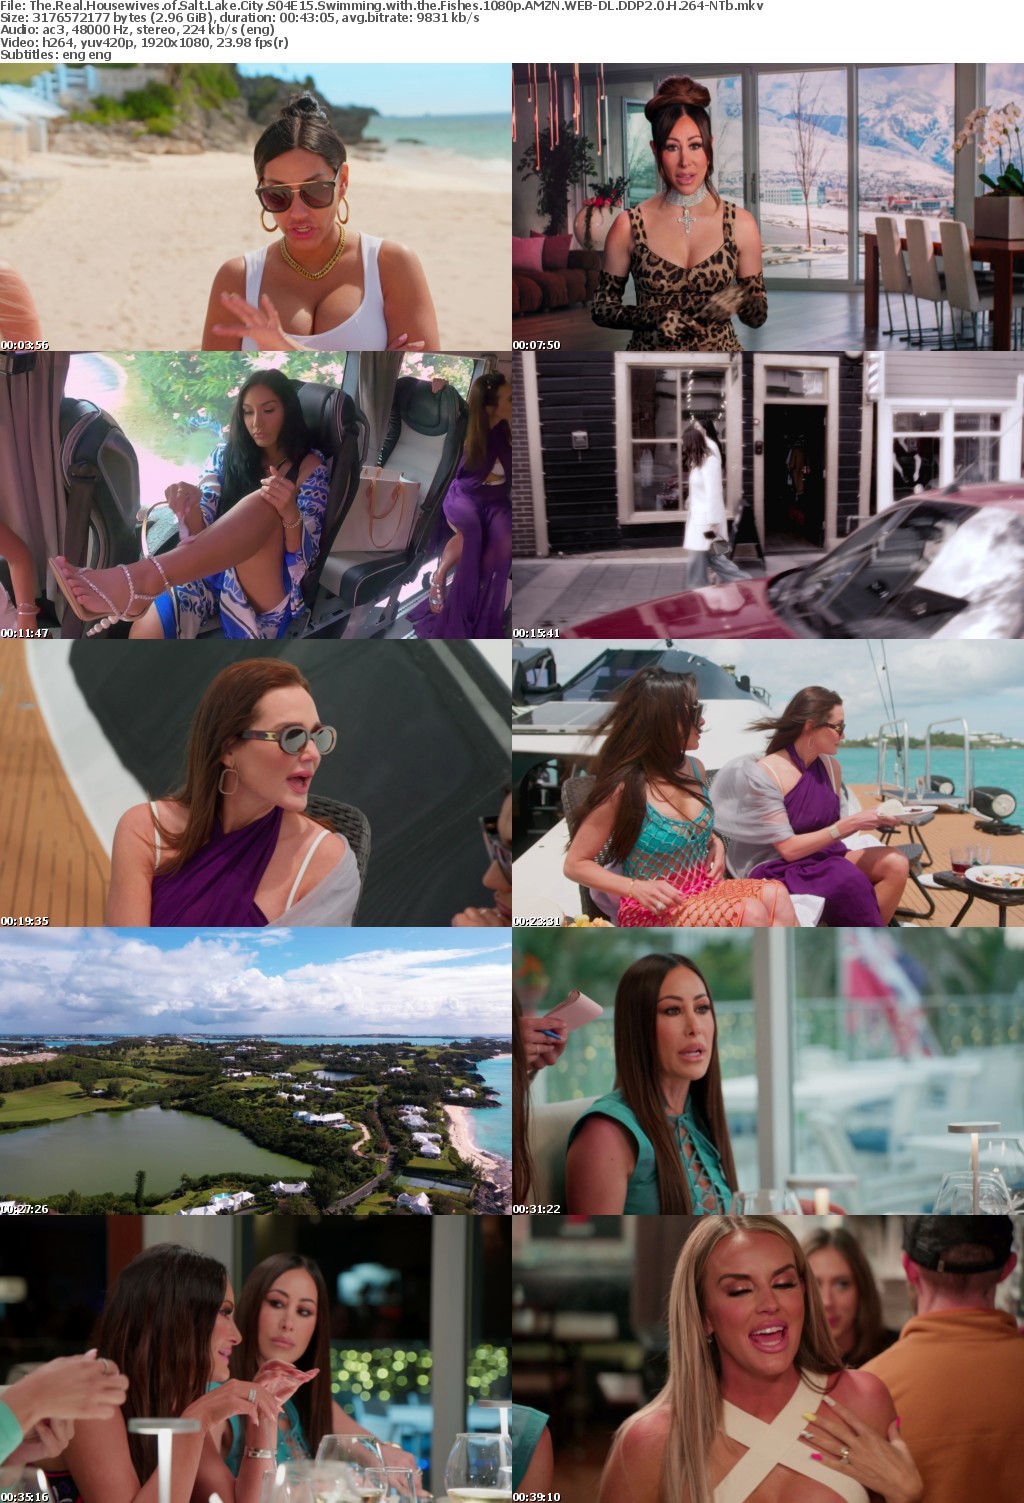 The Real Housewives of Salt Lake City S04E15 Swimming with the Fishes 1080p AMZN WEB-DL DDP2 0 H 264-NTb